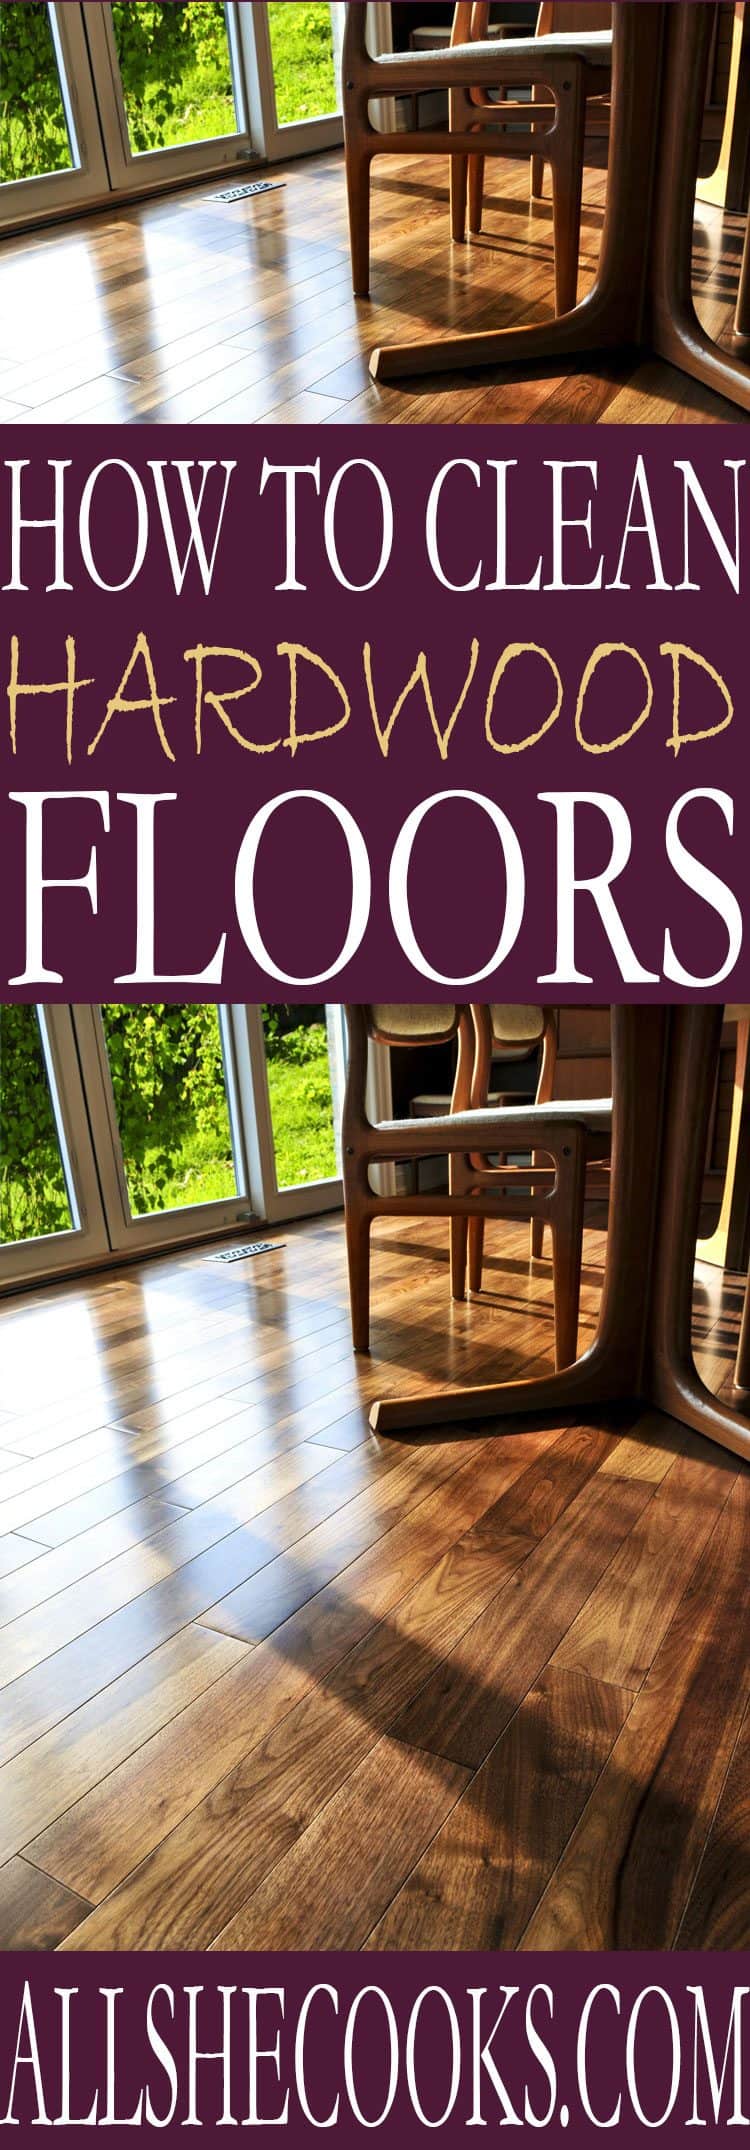 Follow these simple tips to clean hardwood floors to keep your hardwood floors in tip top clean shape. Your floors will be shiny in no time!